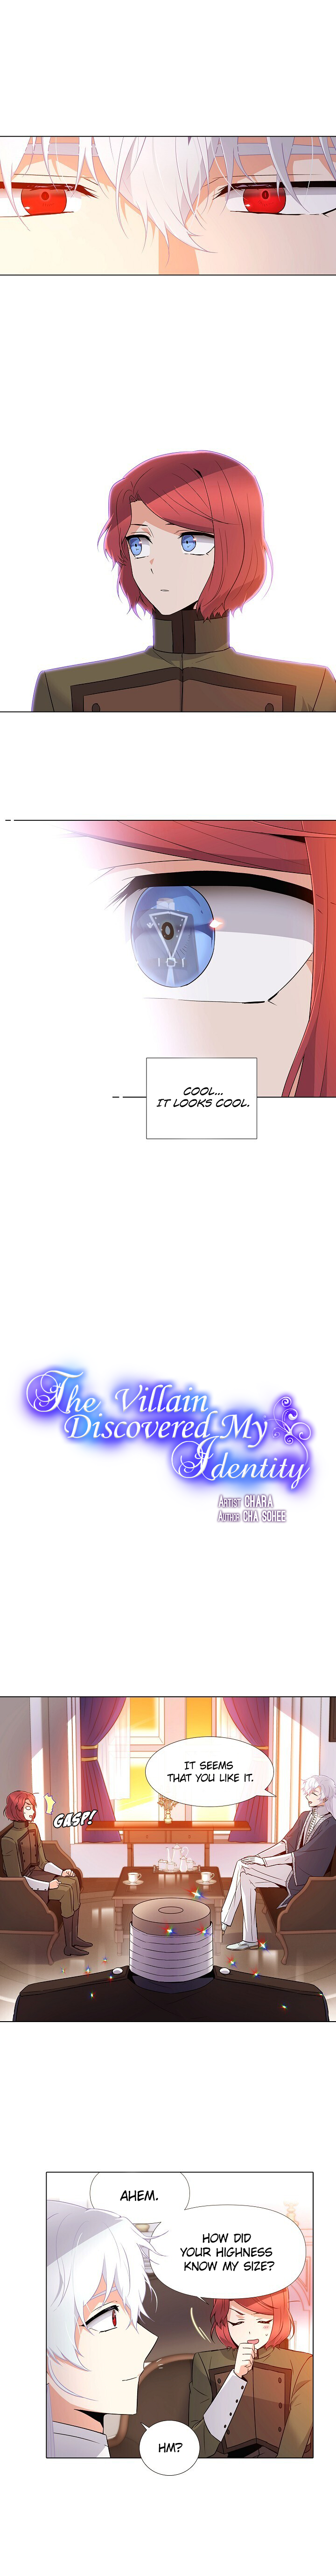 The Villain Discovered My Identity chapter 15